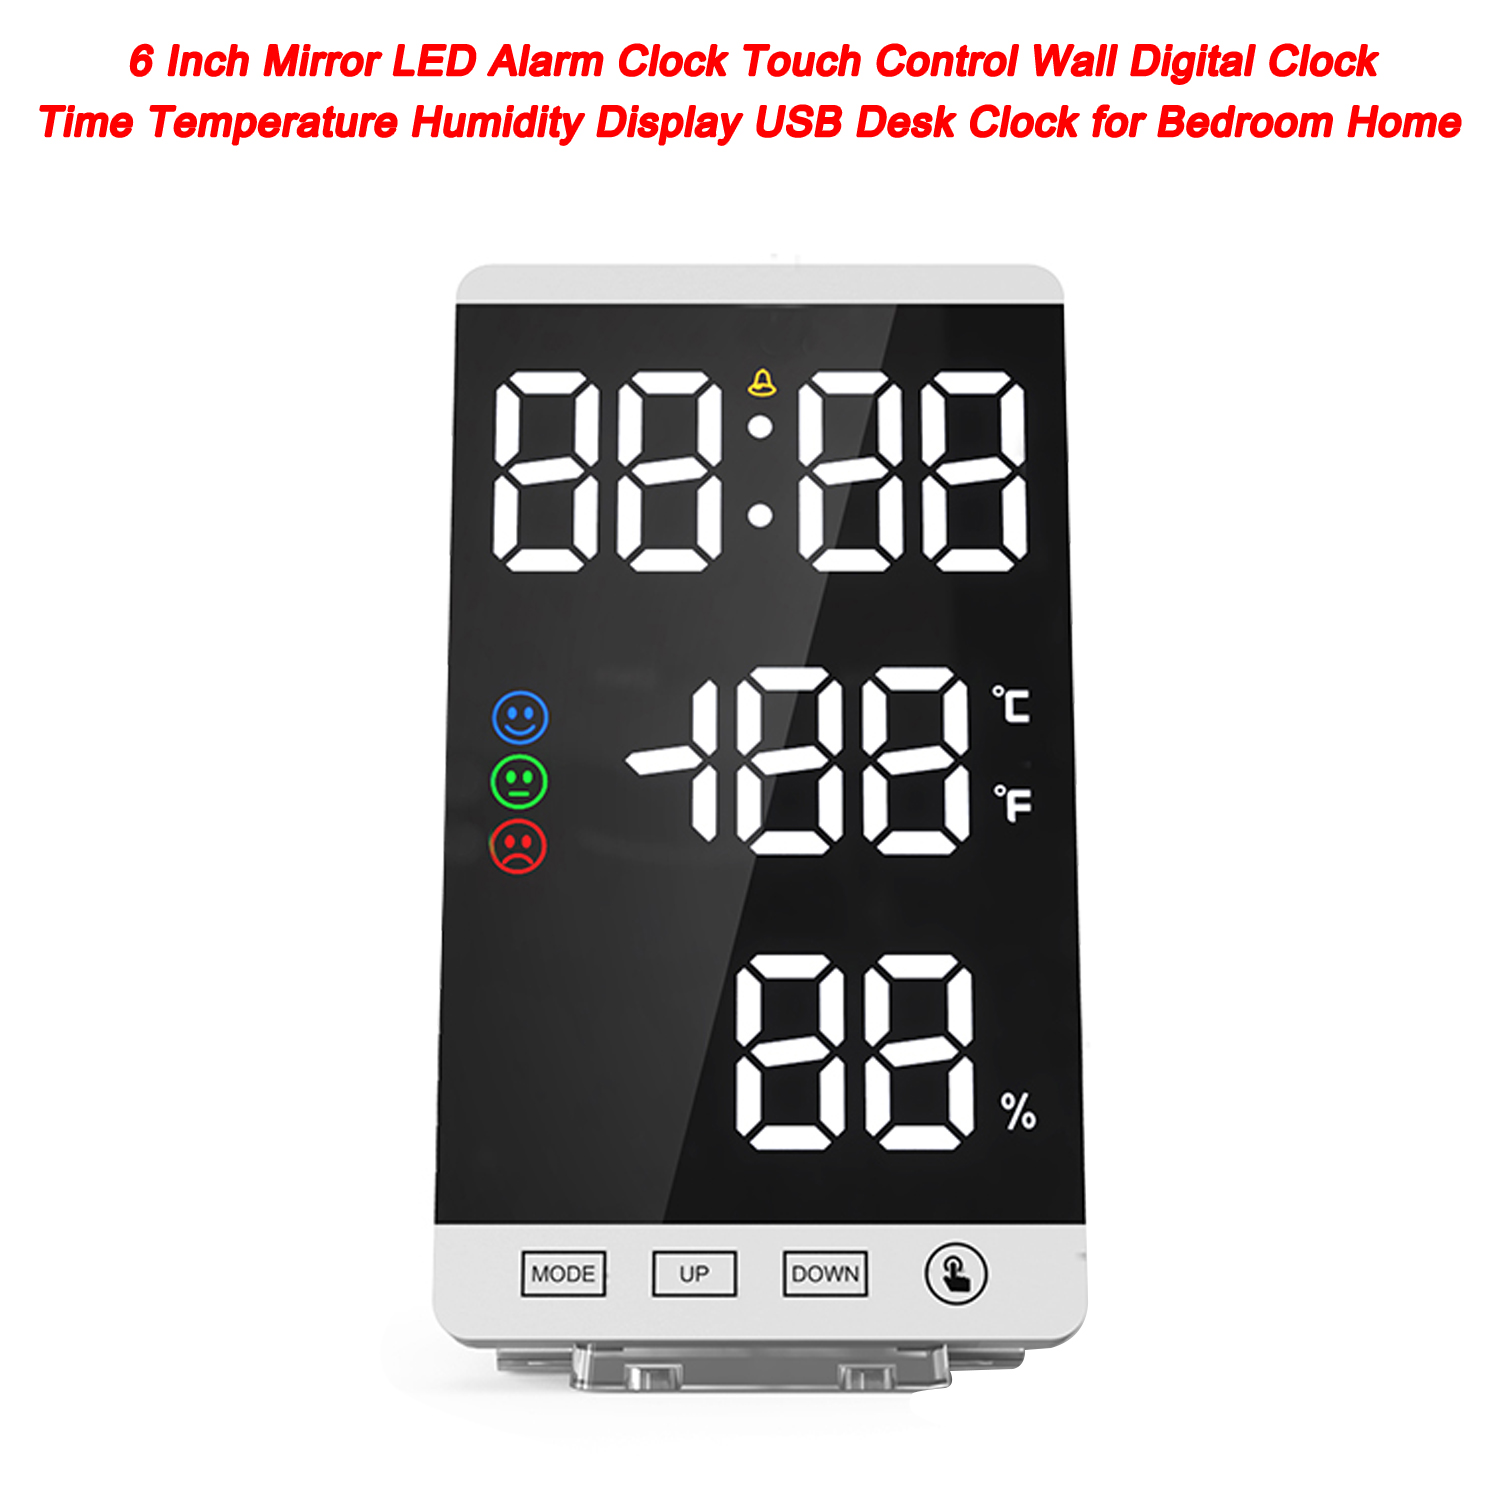 LED Mirror Alarm Clock Touch Control Wall Digital Clock Time Temperature Humidity Display USB Desk Clock for Bedroom Home